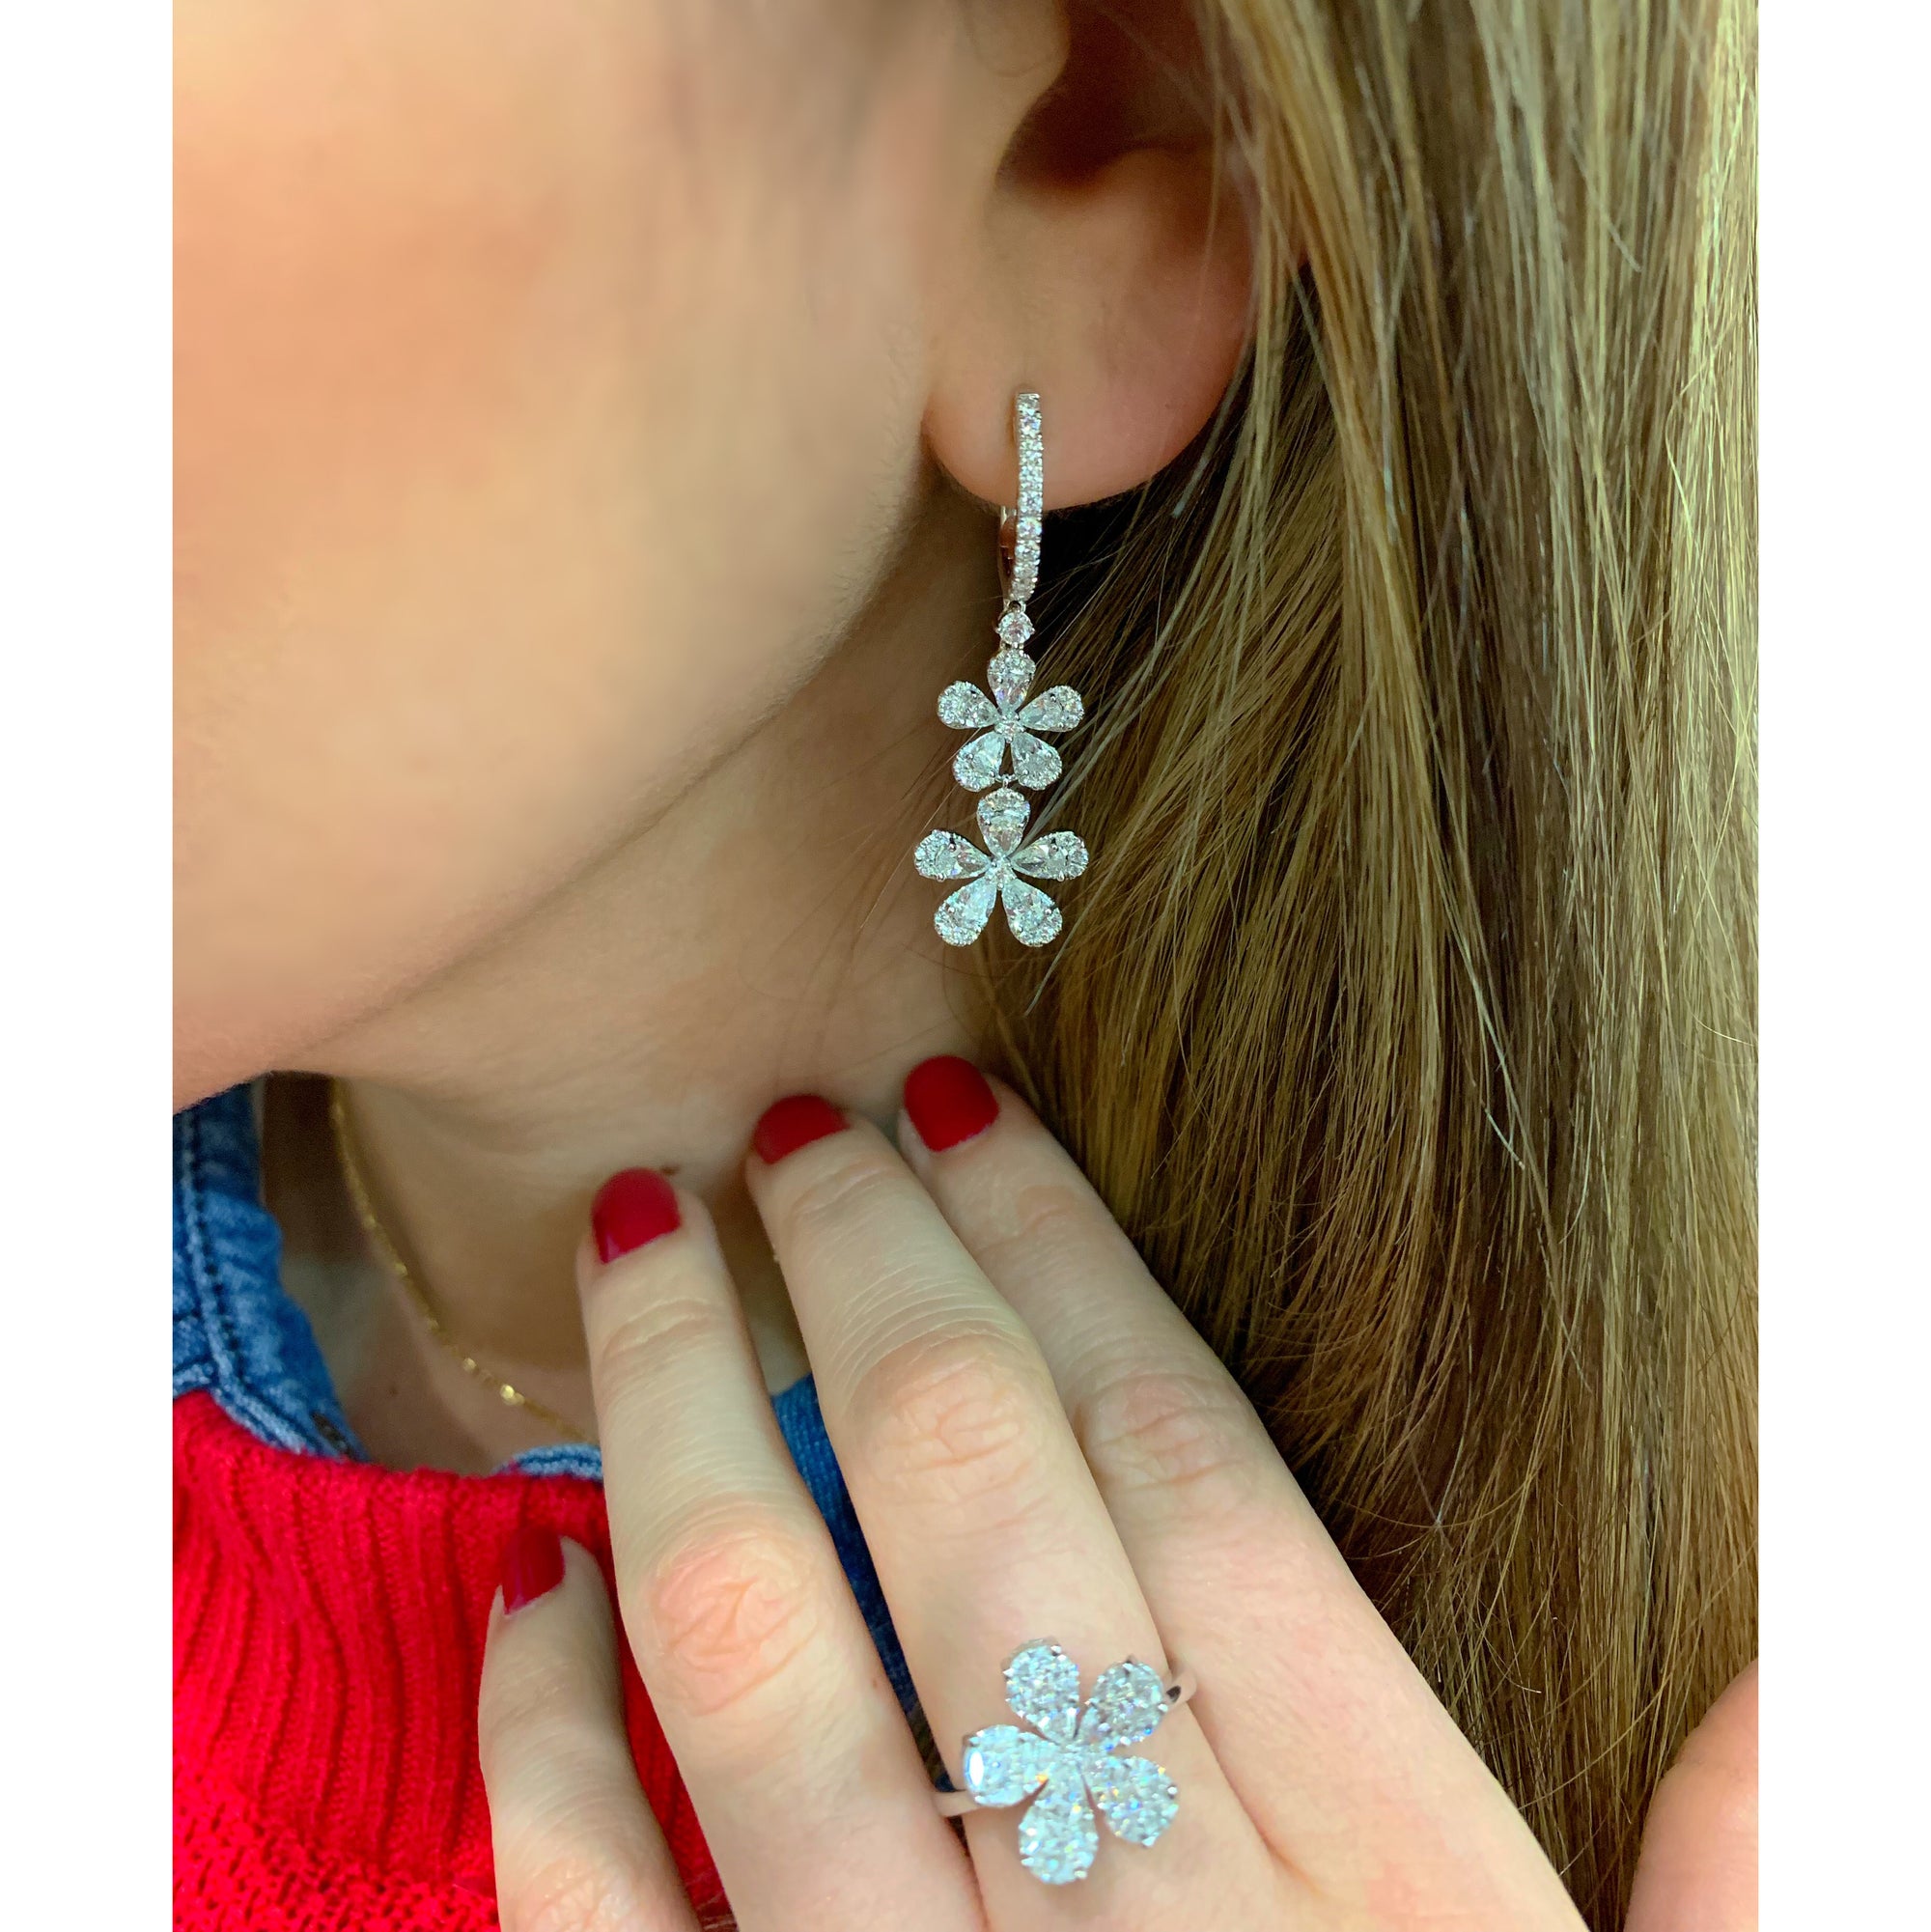 Diamond Double Flower Drop Earrings  -18K gold weighing 7.02 grams  -86 round diamonds totaling 0.87 carats  -20 Pear shape prong-set diamonds totaling 2.33 carats 